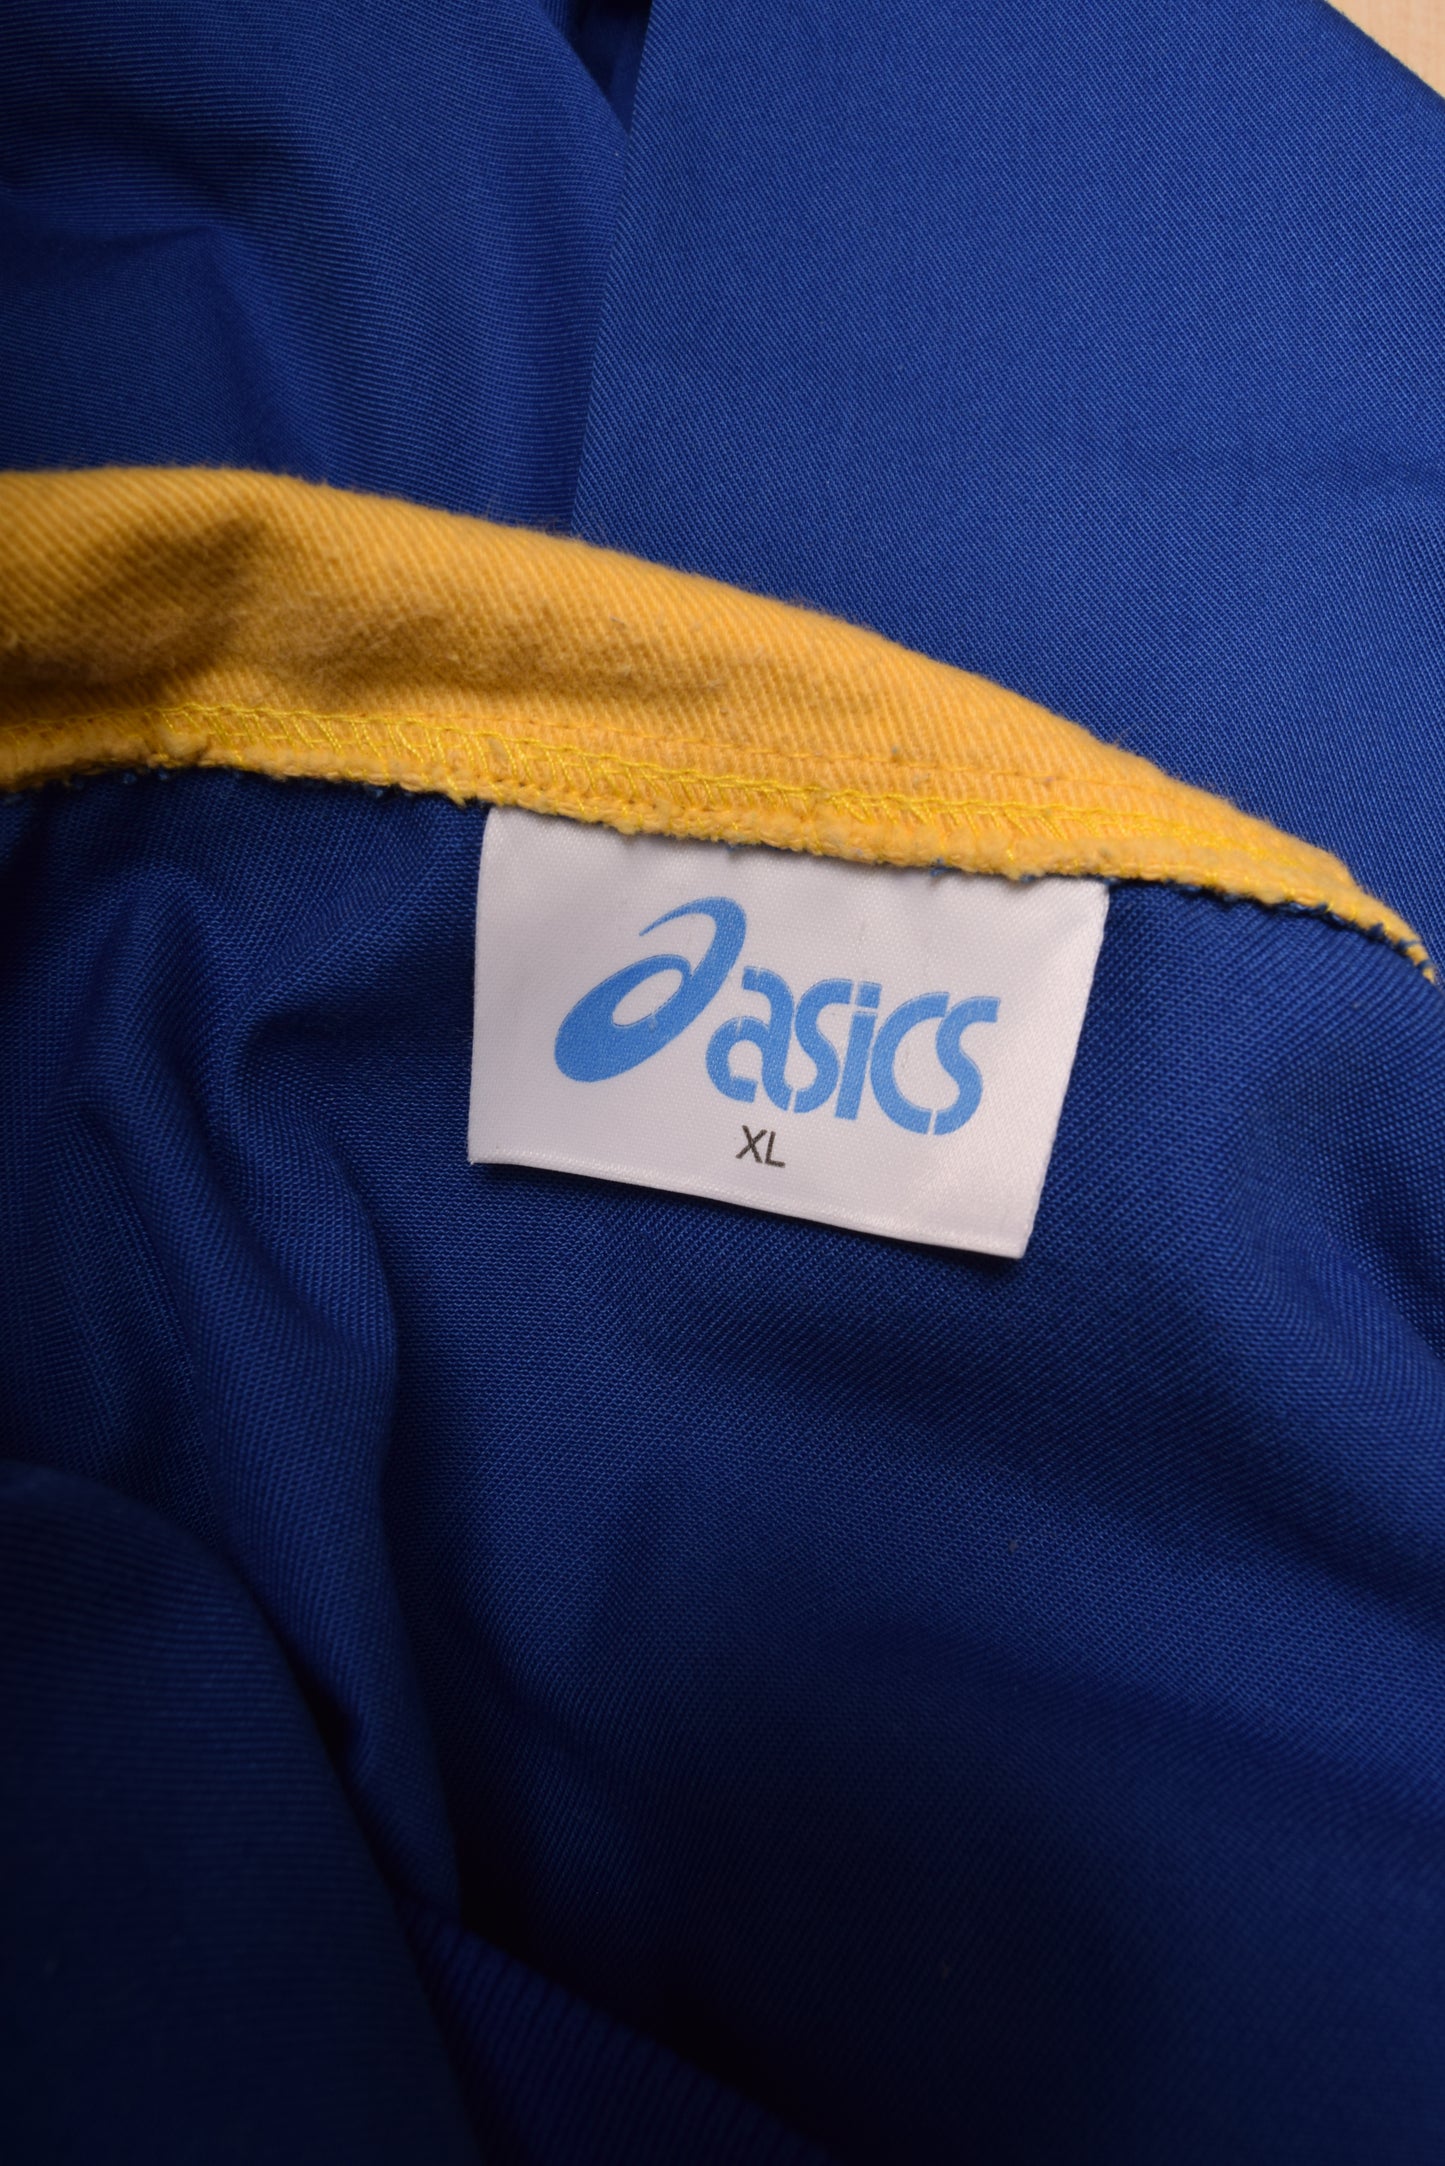 Vintage Leeds United Asics 1993 Drill Top Sweatshirt Jacket Size XL Made in UK Blue Yellow Thistle Hotels